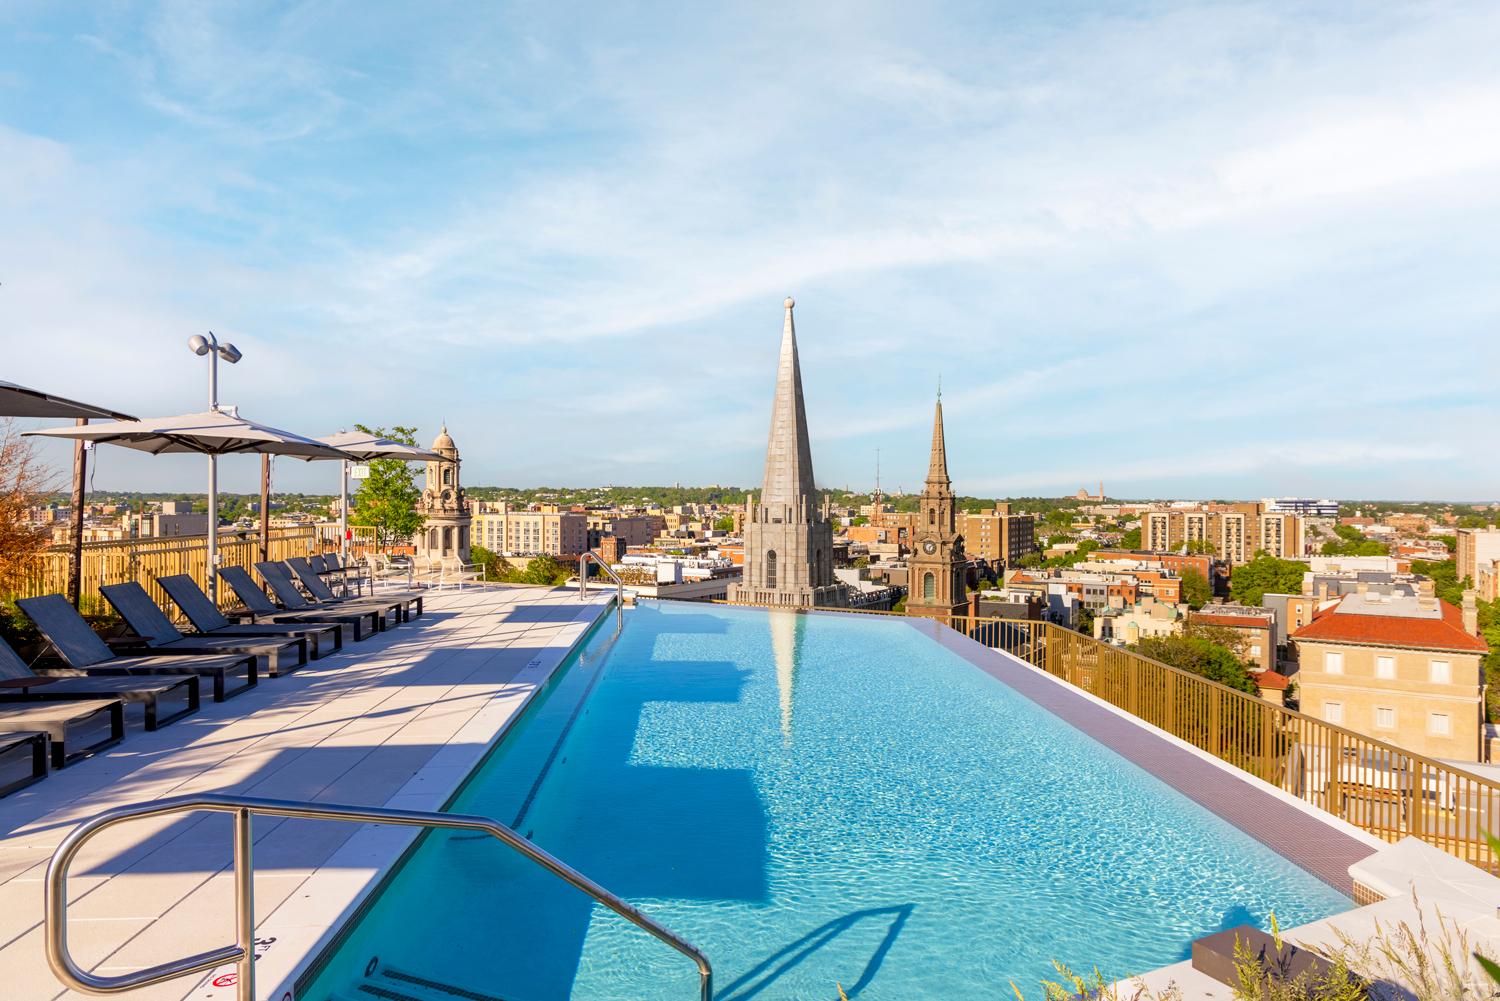 Take a dip in our rooftop infinity pool 